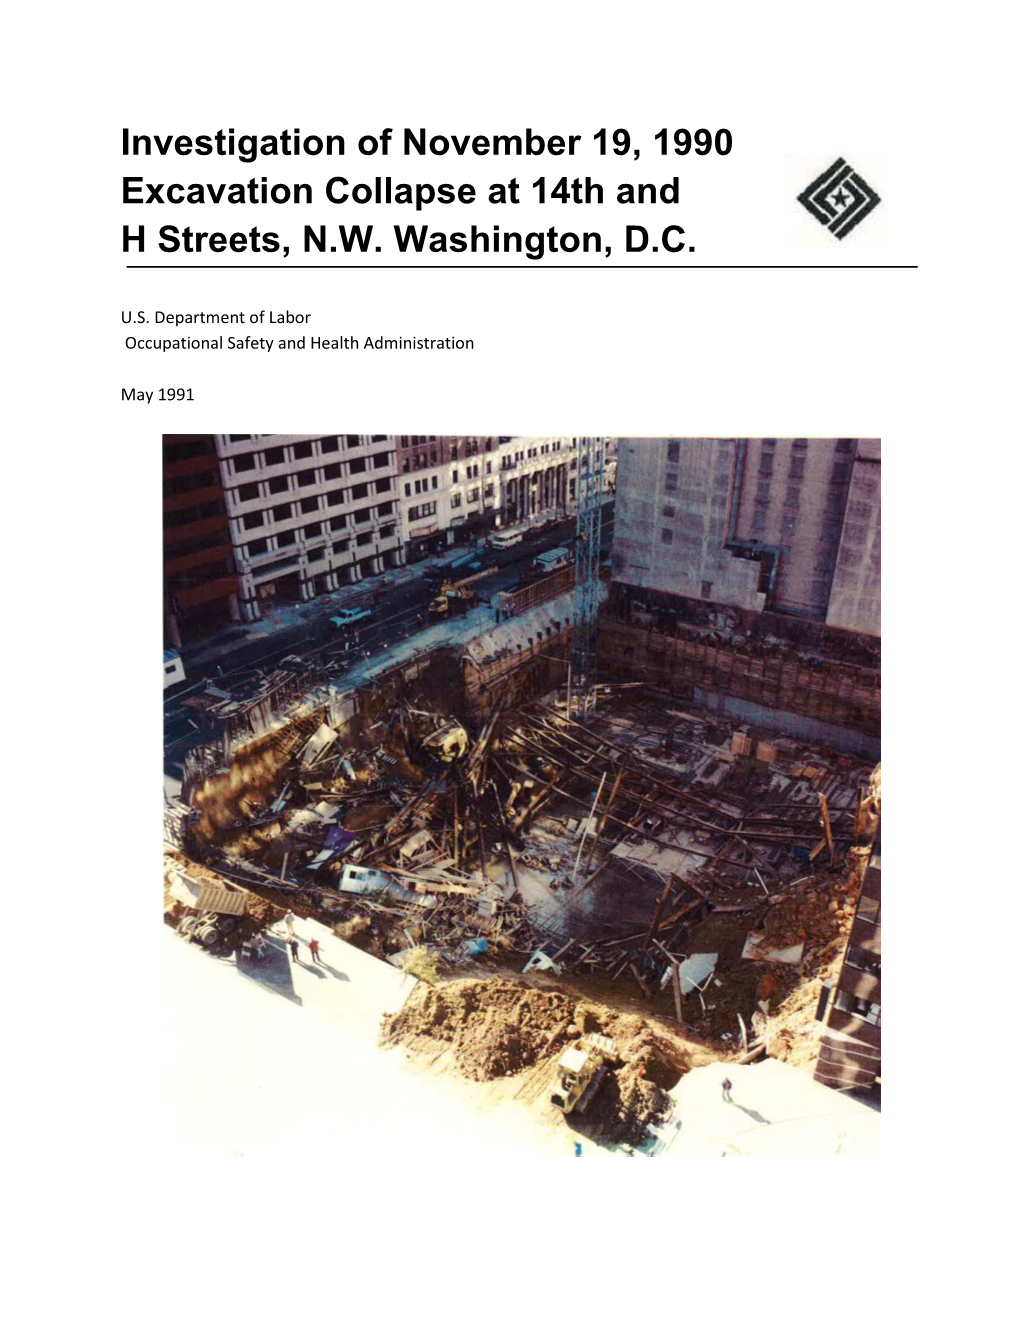 Investigation of November 19, 1990 Excavation Collapse at 14Th and H Streets, N.W